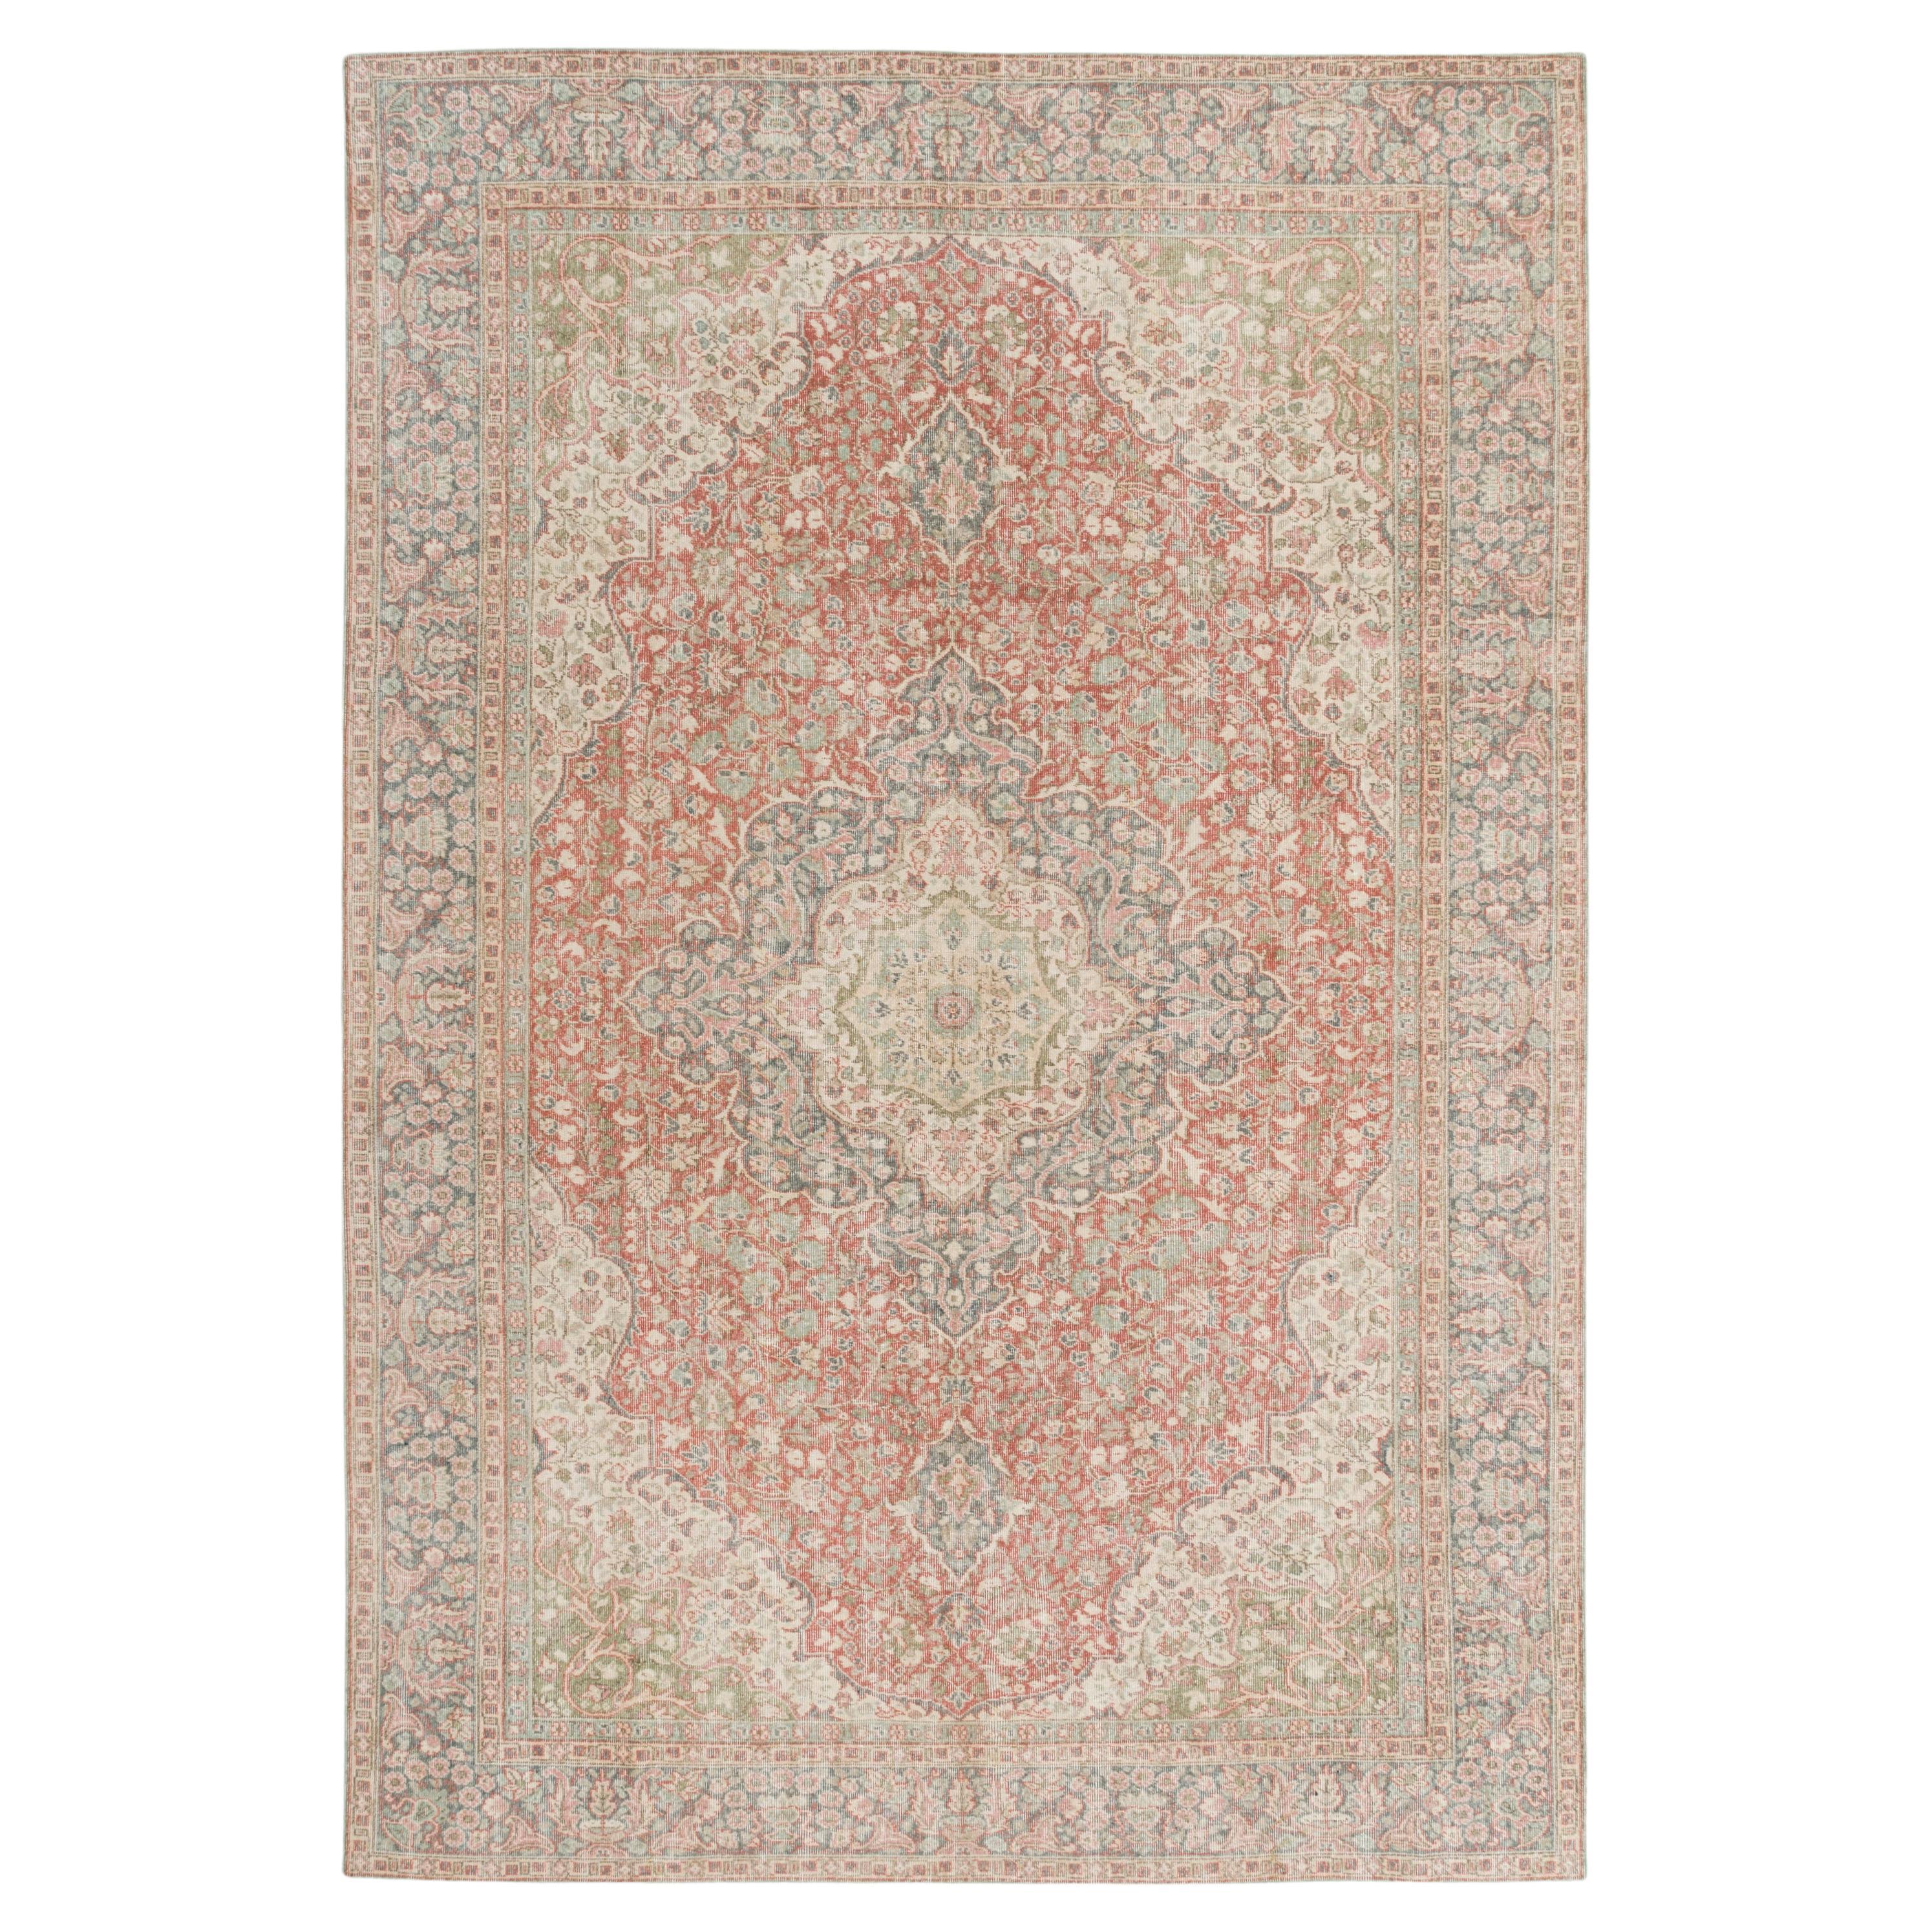 8.8x13 Ft One-of-a-Kind Mid-20th Century Turkish Wool Area Rug in Muted Colors For Sale